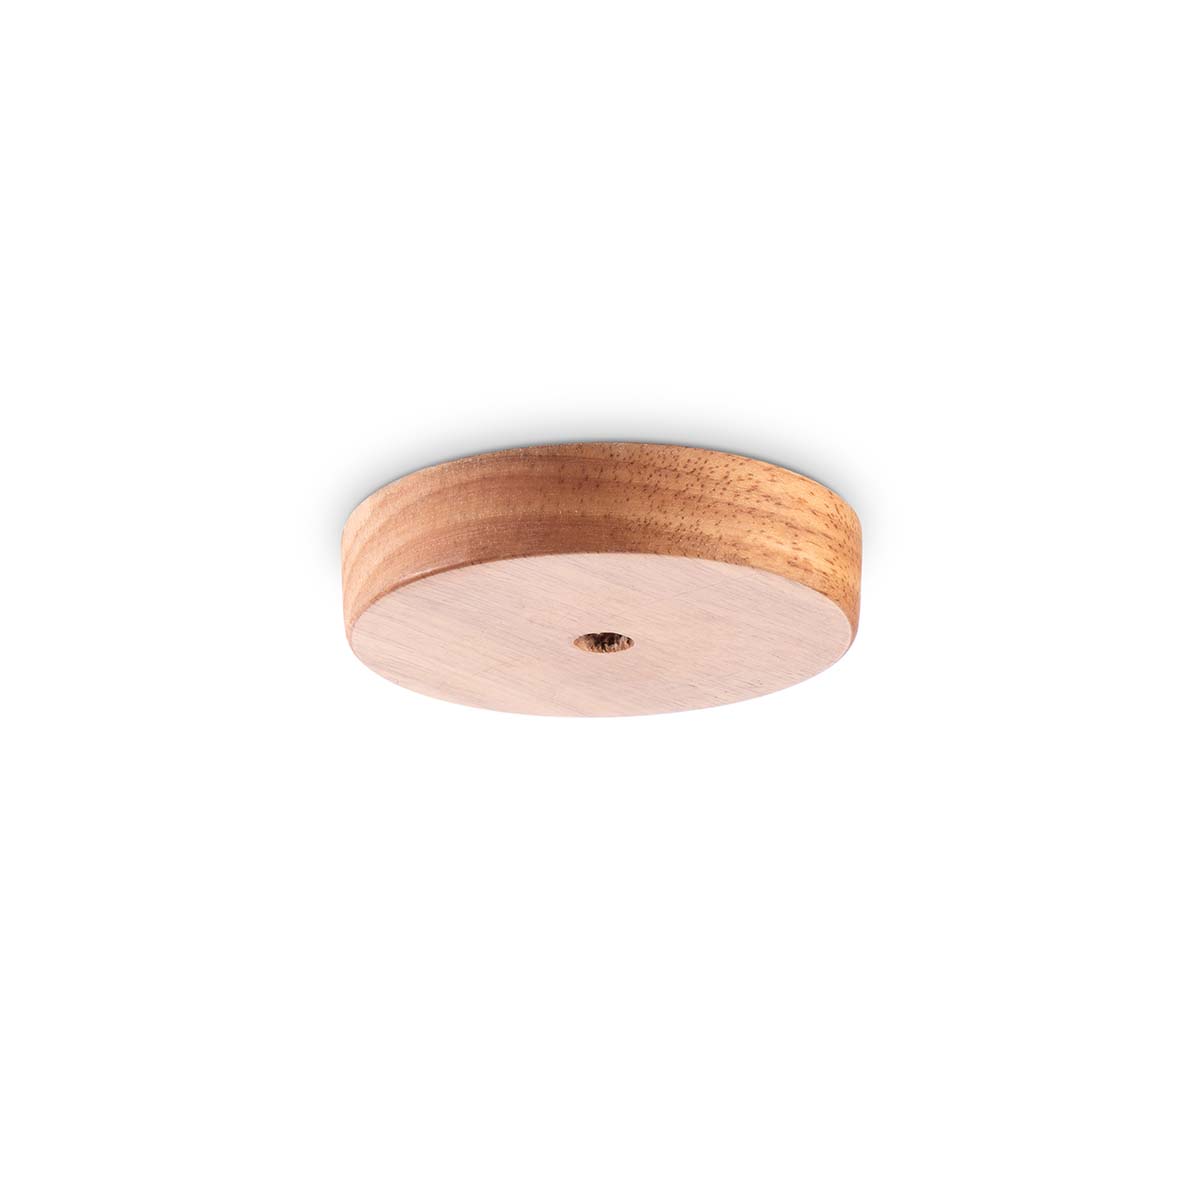 Tangla lighting - TLCP018-01NT - FSC wood 1 Light round canopy - natural